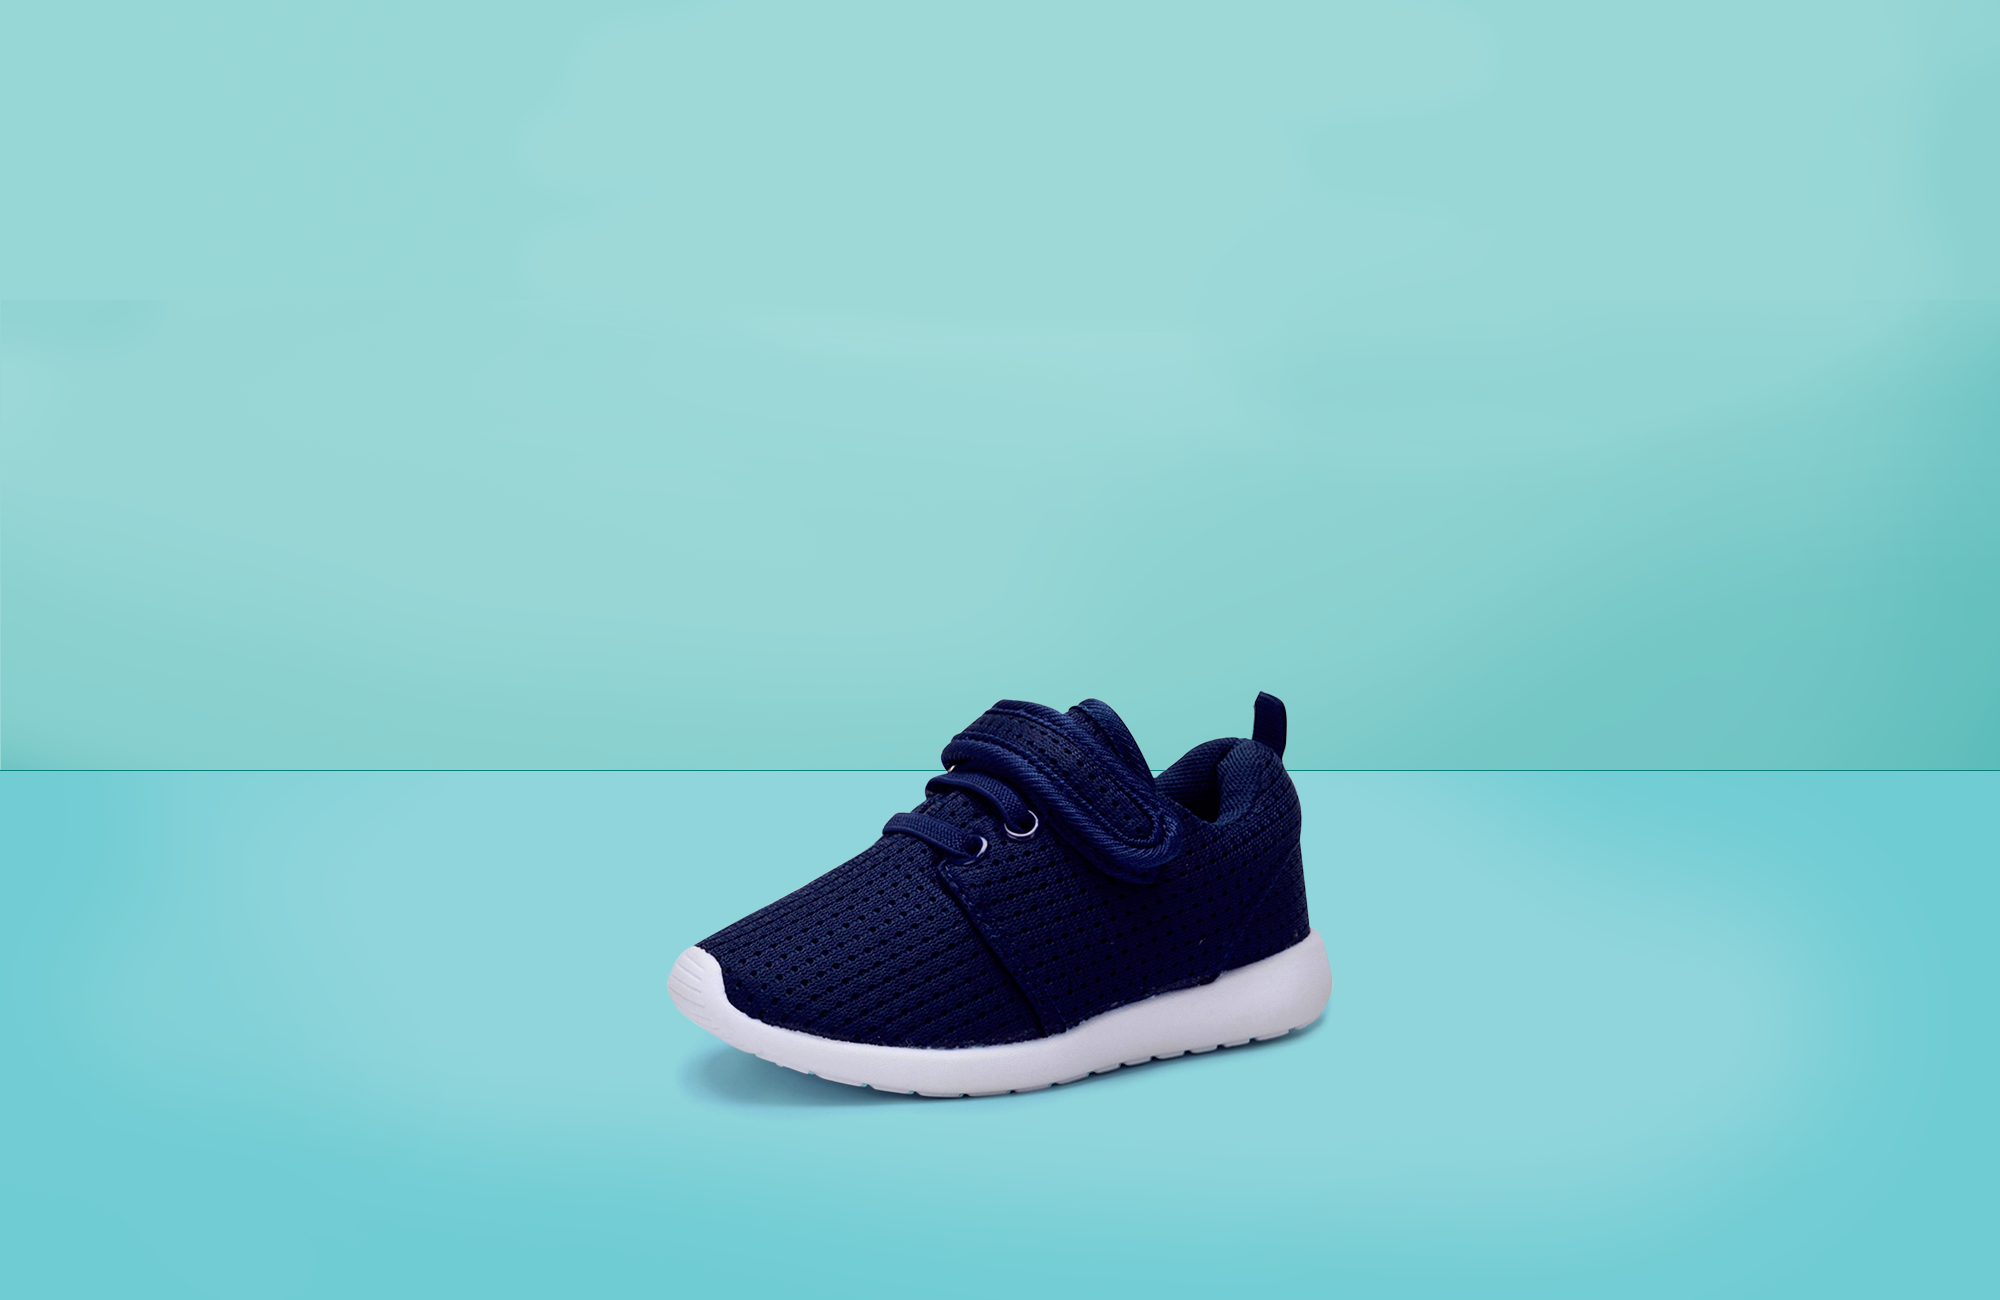 10 Best Kids Sneakers - Children's Shoes for Boys and Girls